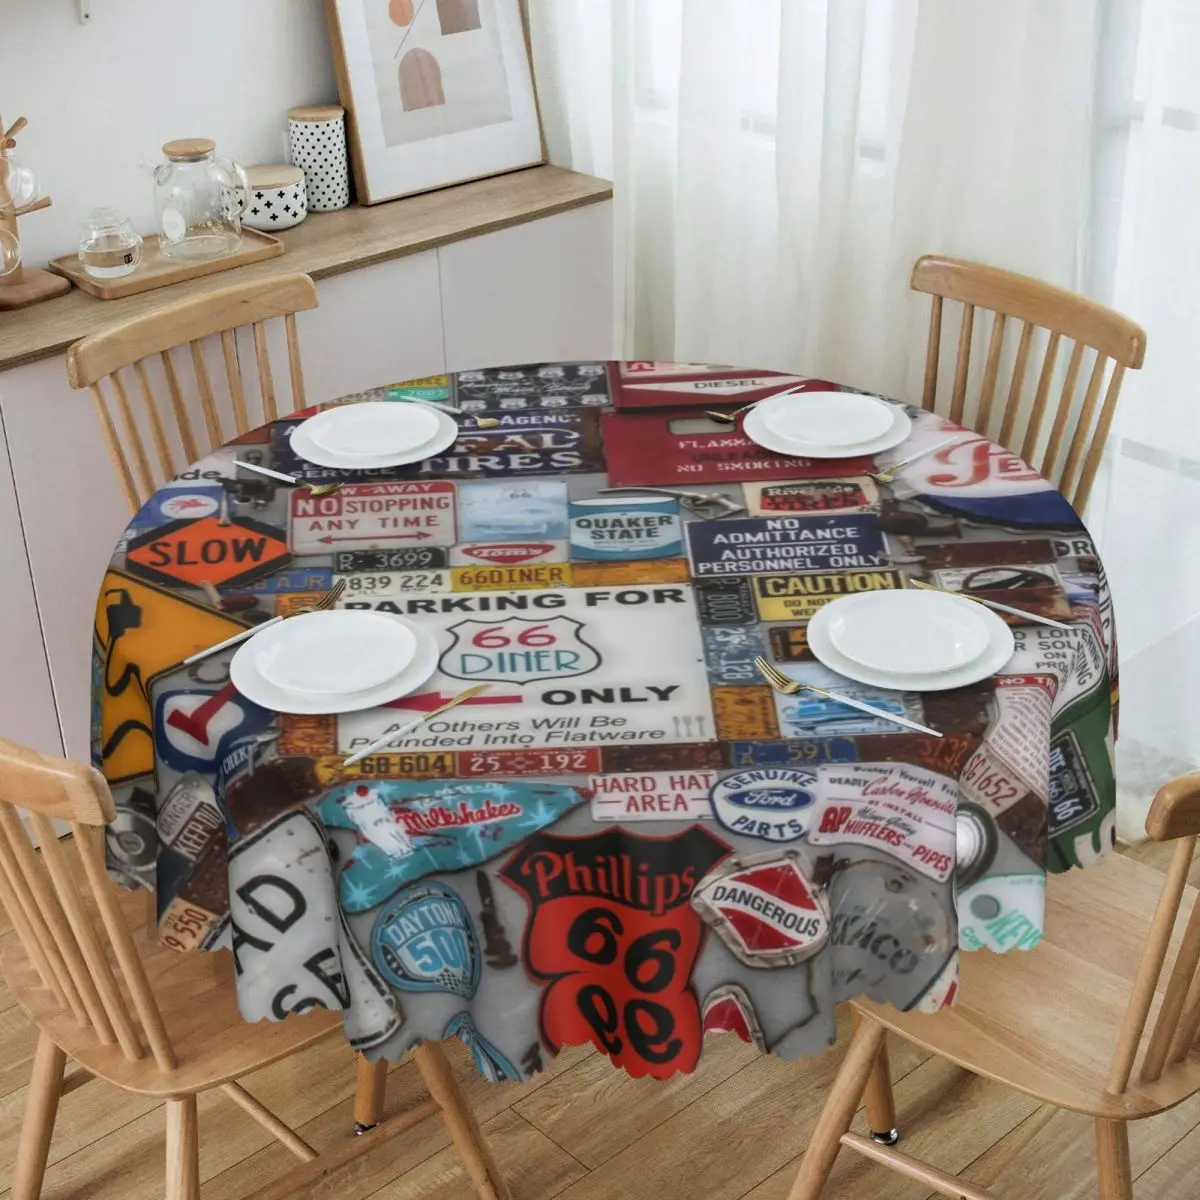 

America Highway Tablecloth Round Oilproof US Route 66 Signs Table Cloth Cover for Dining Room 60 inch